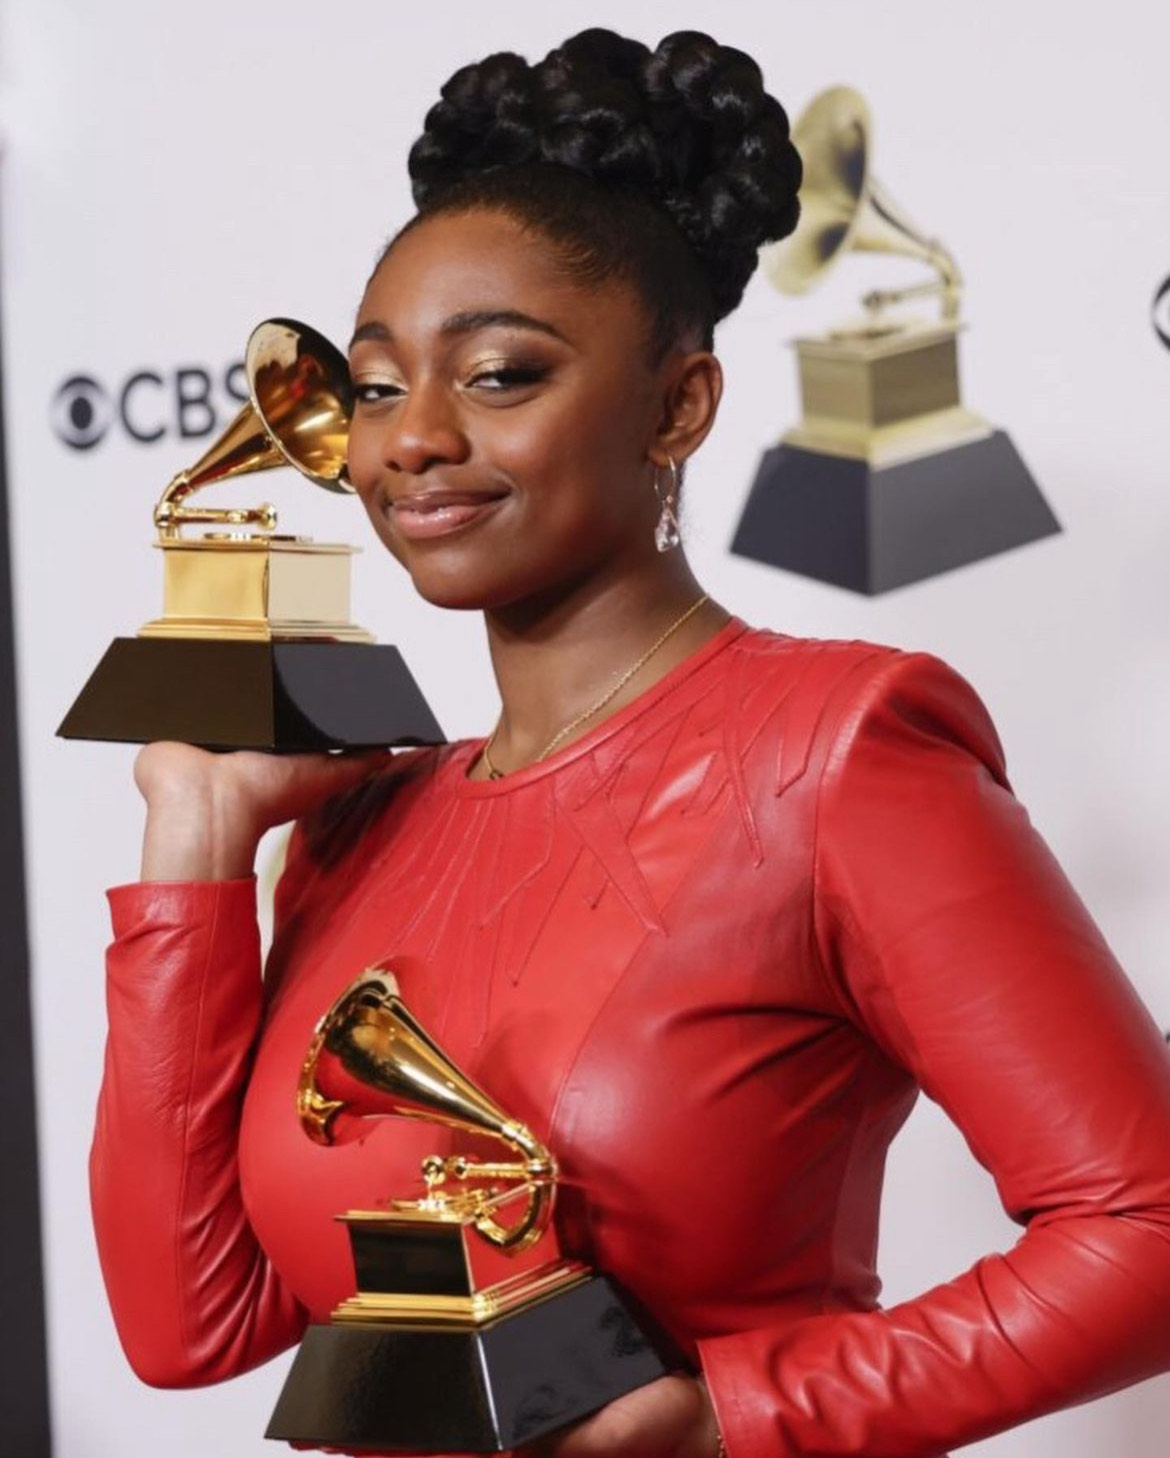 Samara Joy won a Grammy for best new artist, and her jazz album Linger Awhile. Her career as a jazz artist was already successful, but after this it really took off.